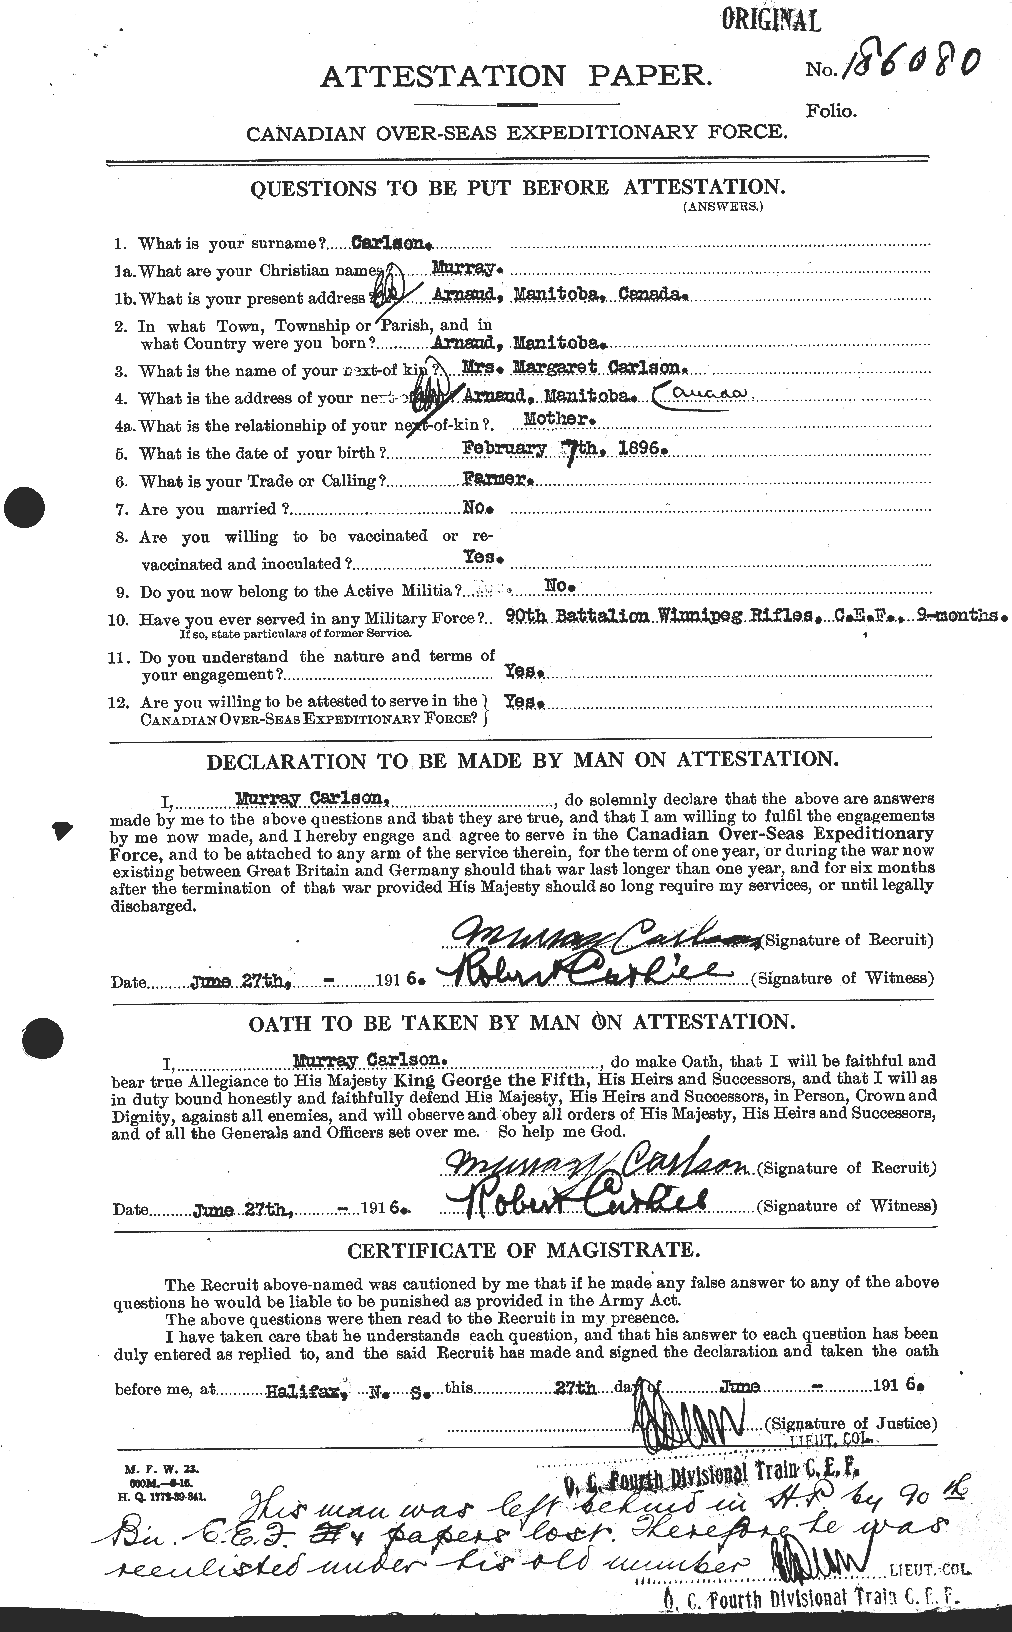 Personnel Records of the First World War - CEF 004577a